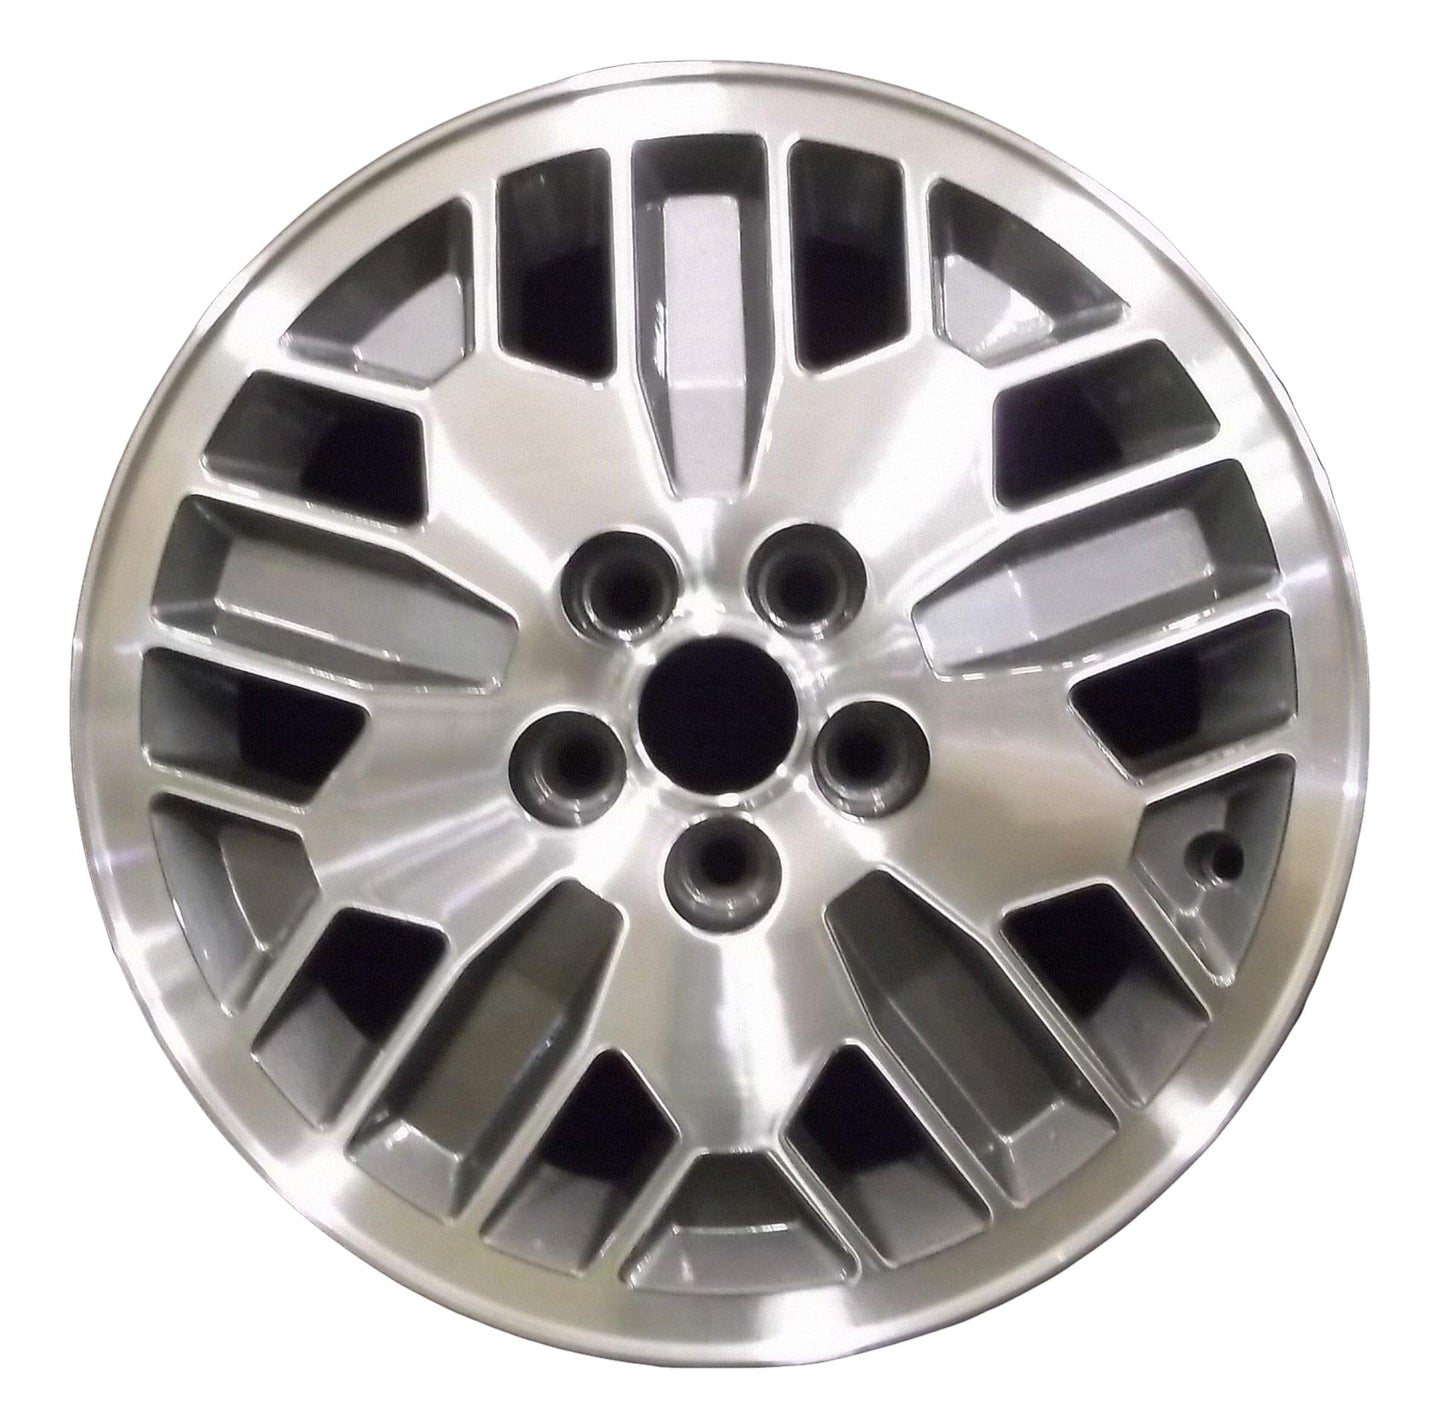 Plymouth Lancer  1989 Factory OEM Car Wheel Size 15x6 Alloy WAO.1686.PC06.MA